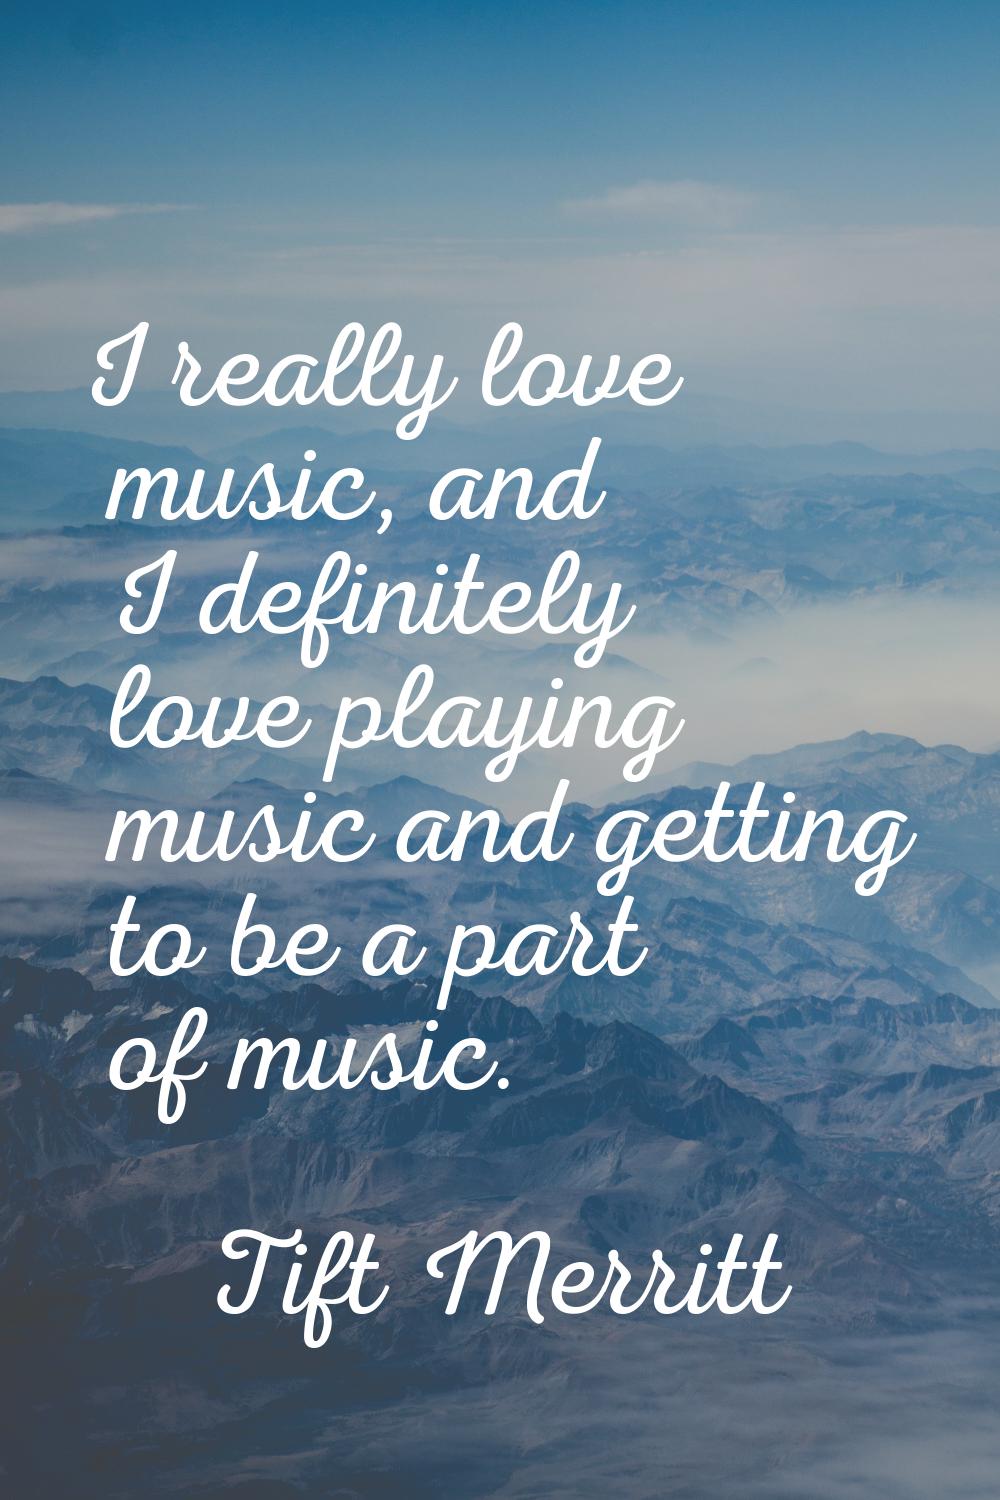 I really love music, and I definitely love playing music and getting to be a part of music.